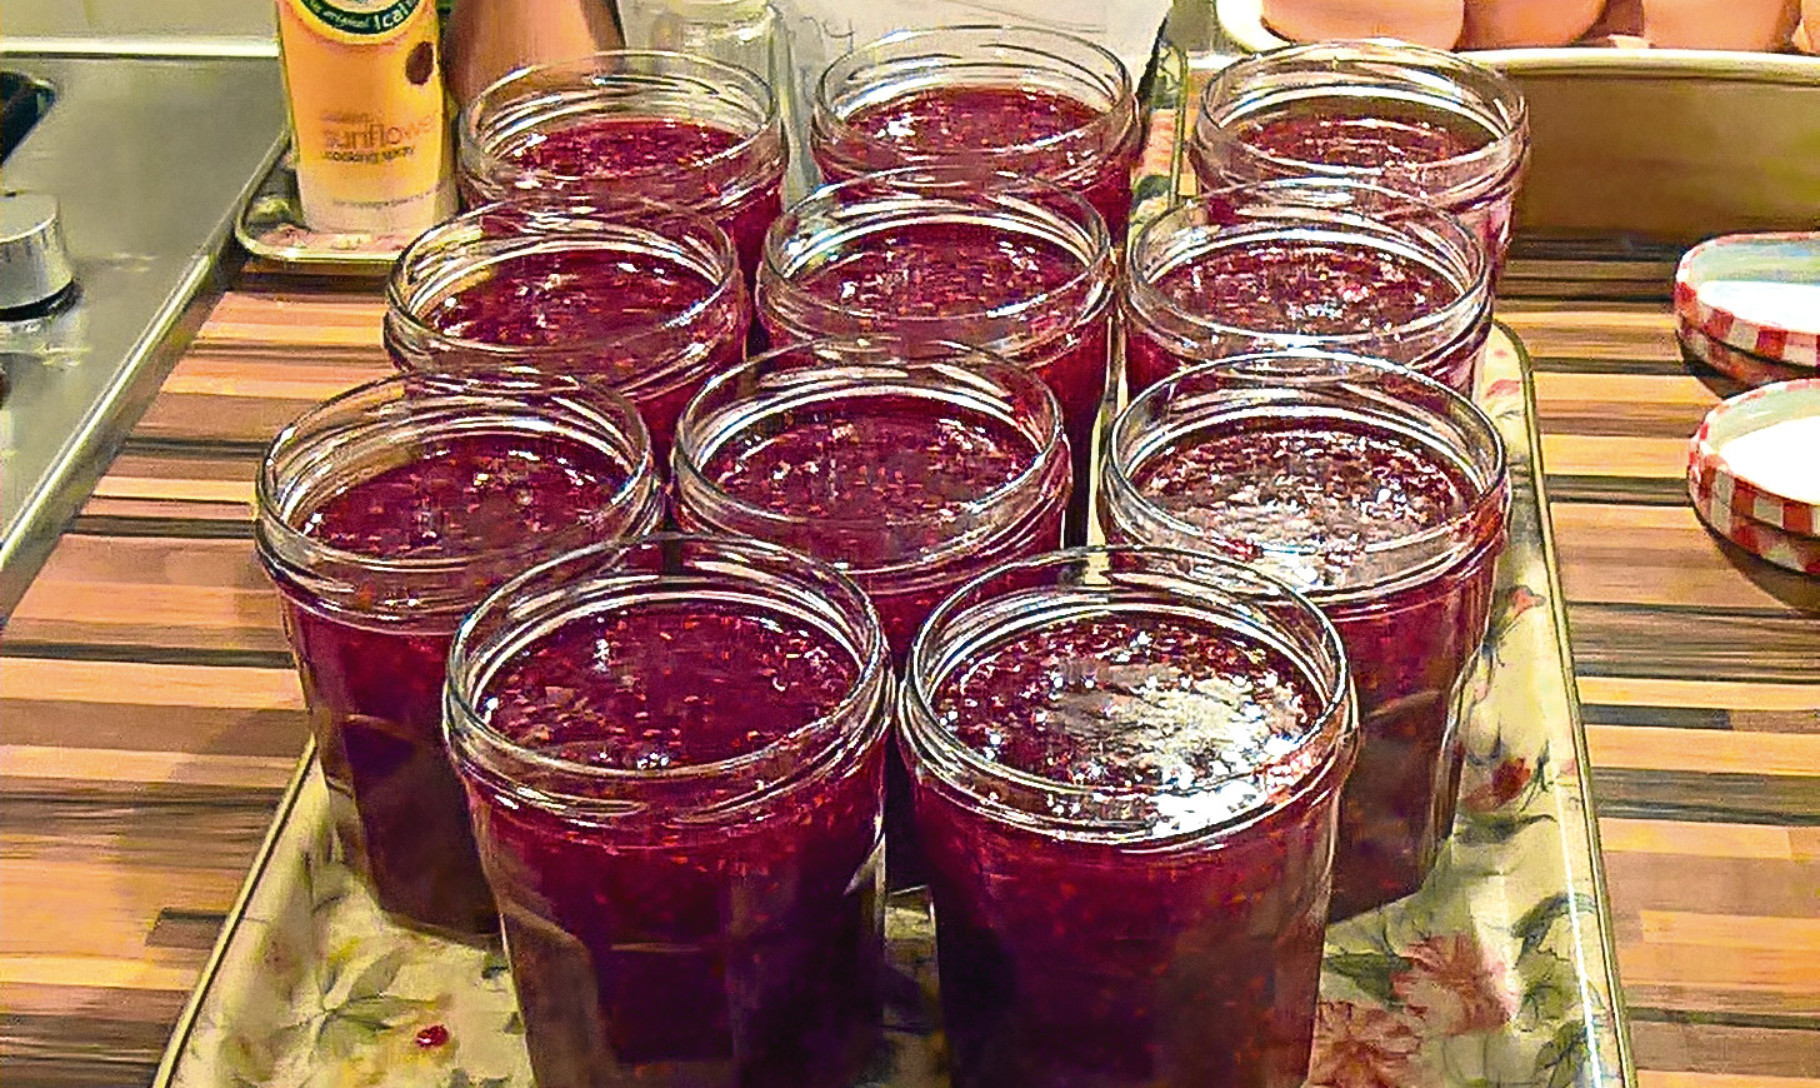 Nothing makes the sweet taste of summer better than homemade jams and conserves made from wild summer berries.